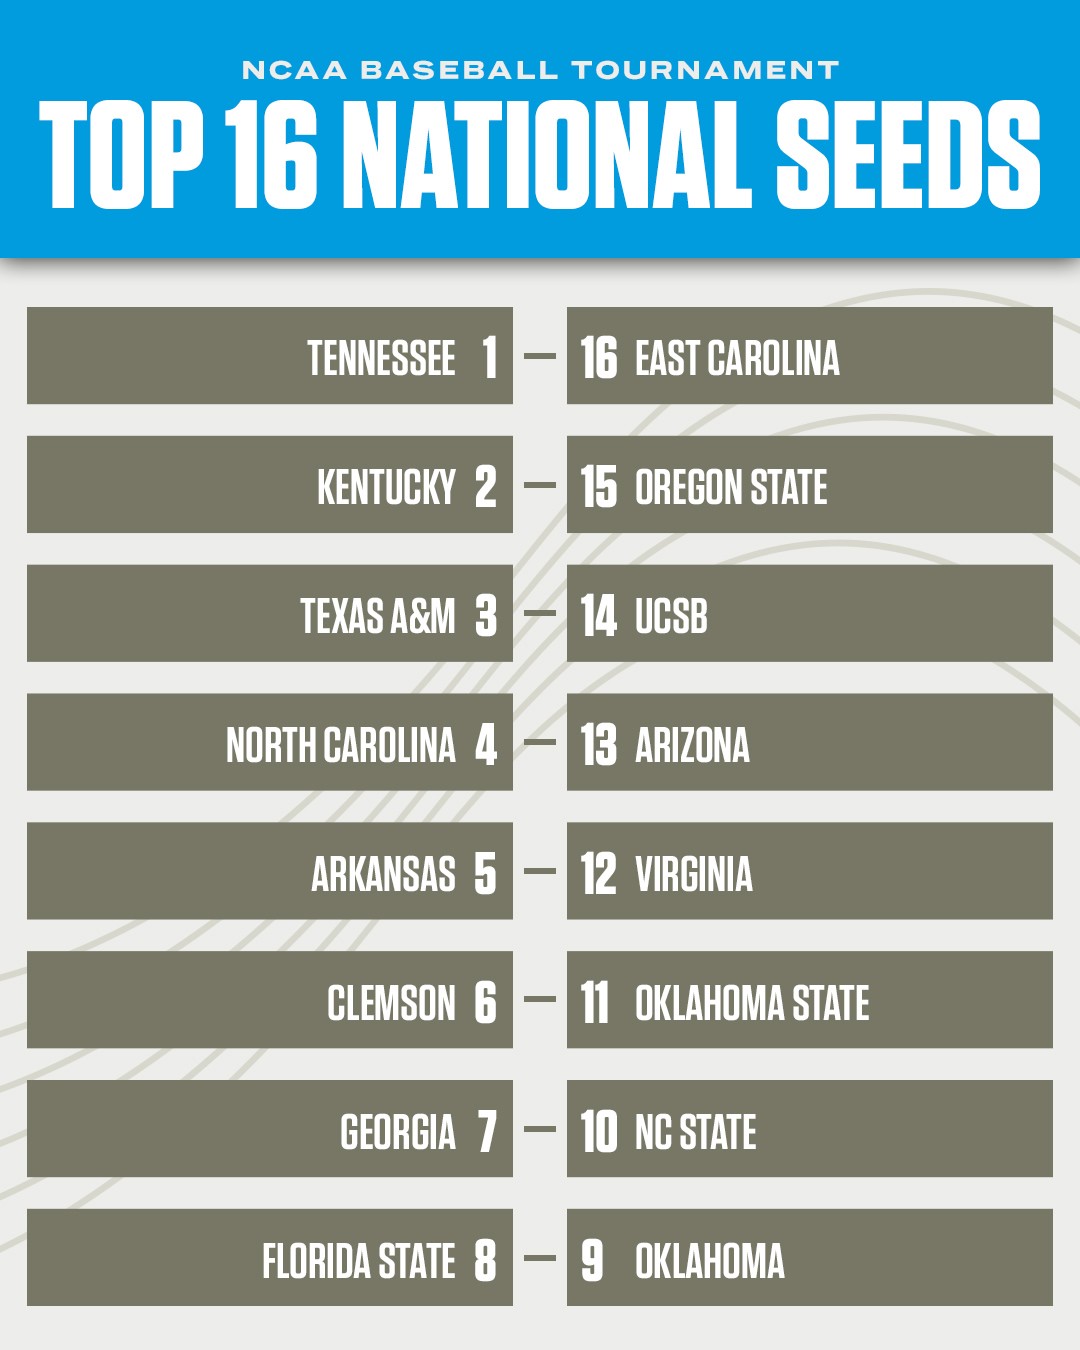 THE TOP 16 TEAMS IN THE NCAA BASEBALL TOURNAMENT ????